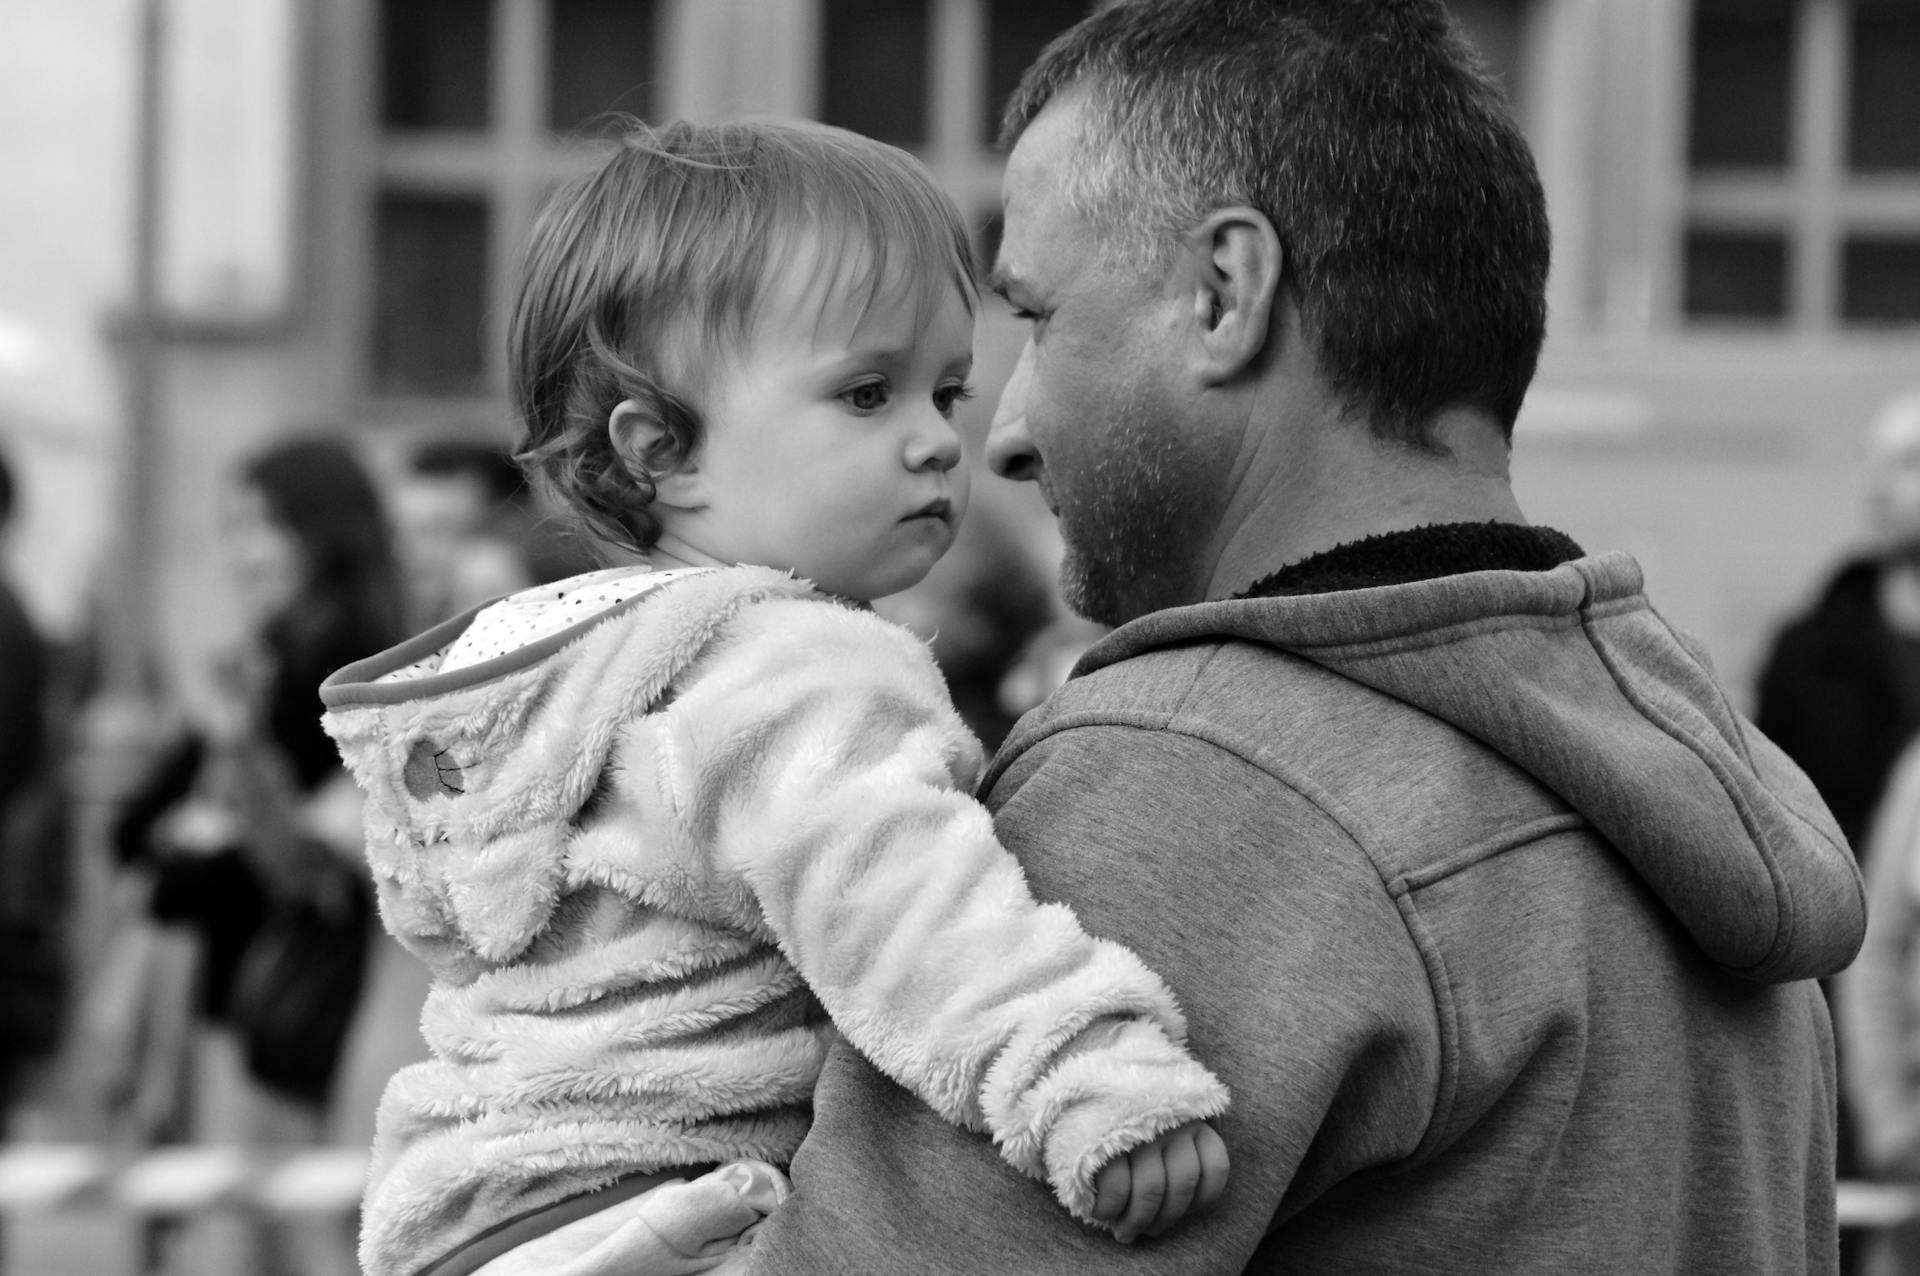 A man carrying a kid in his arms | Source: Pexels